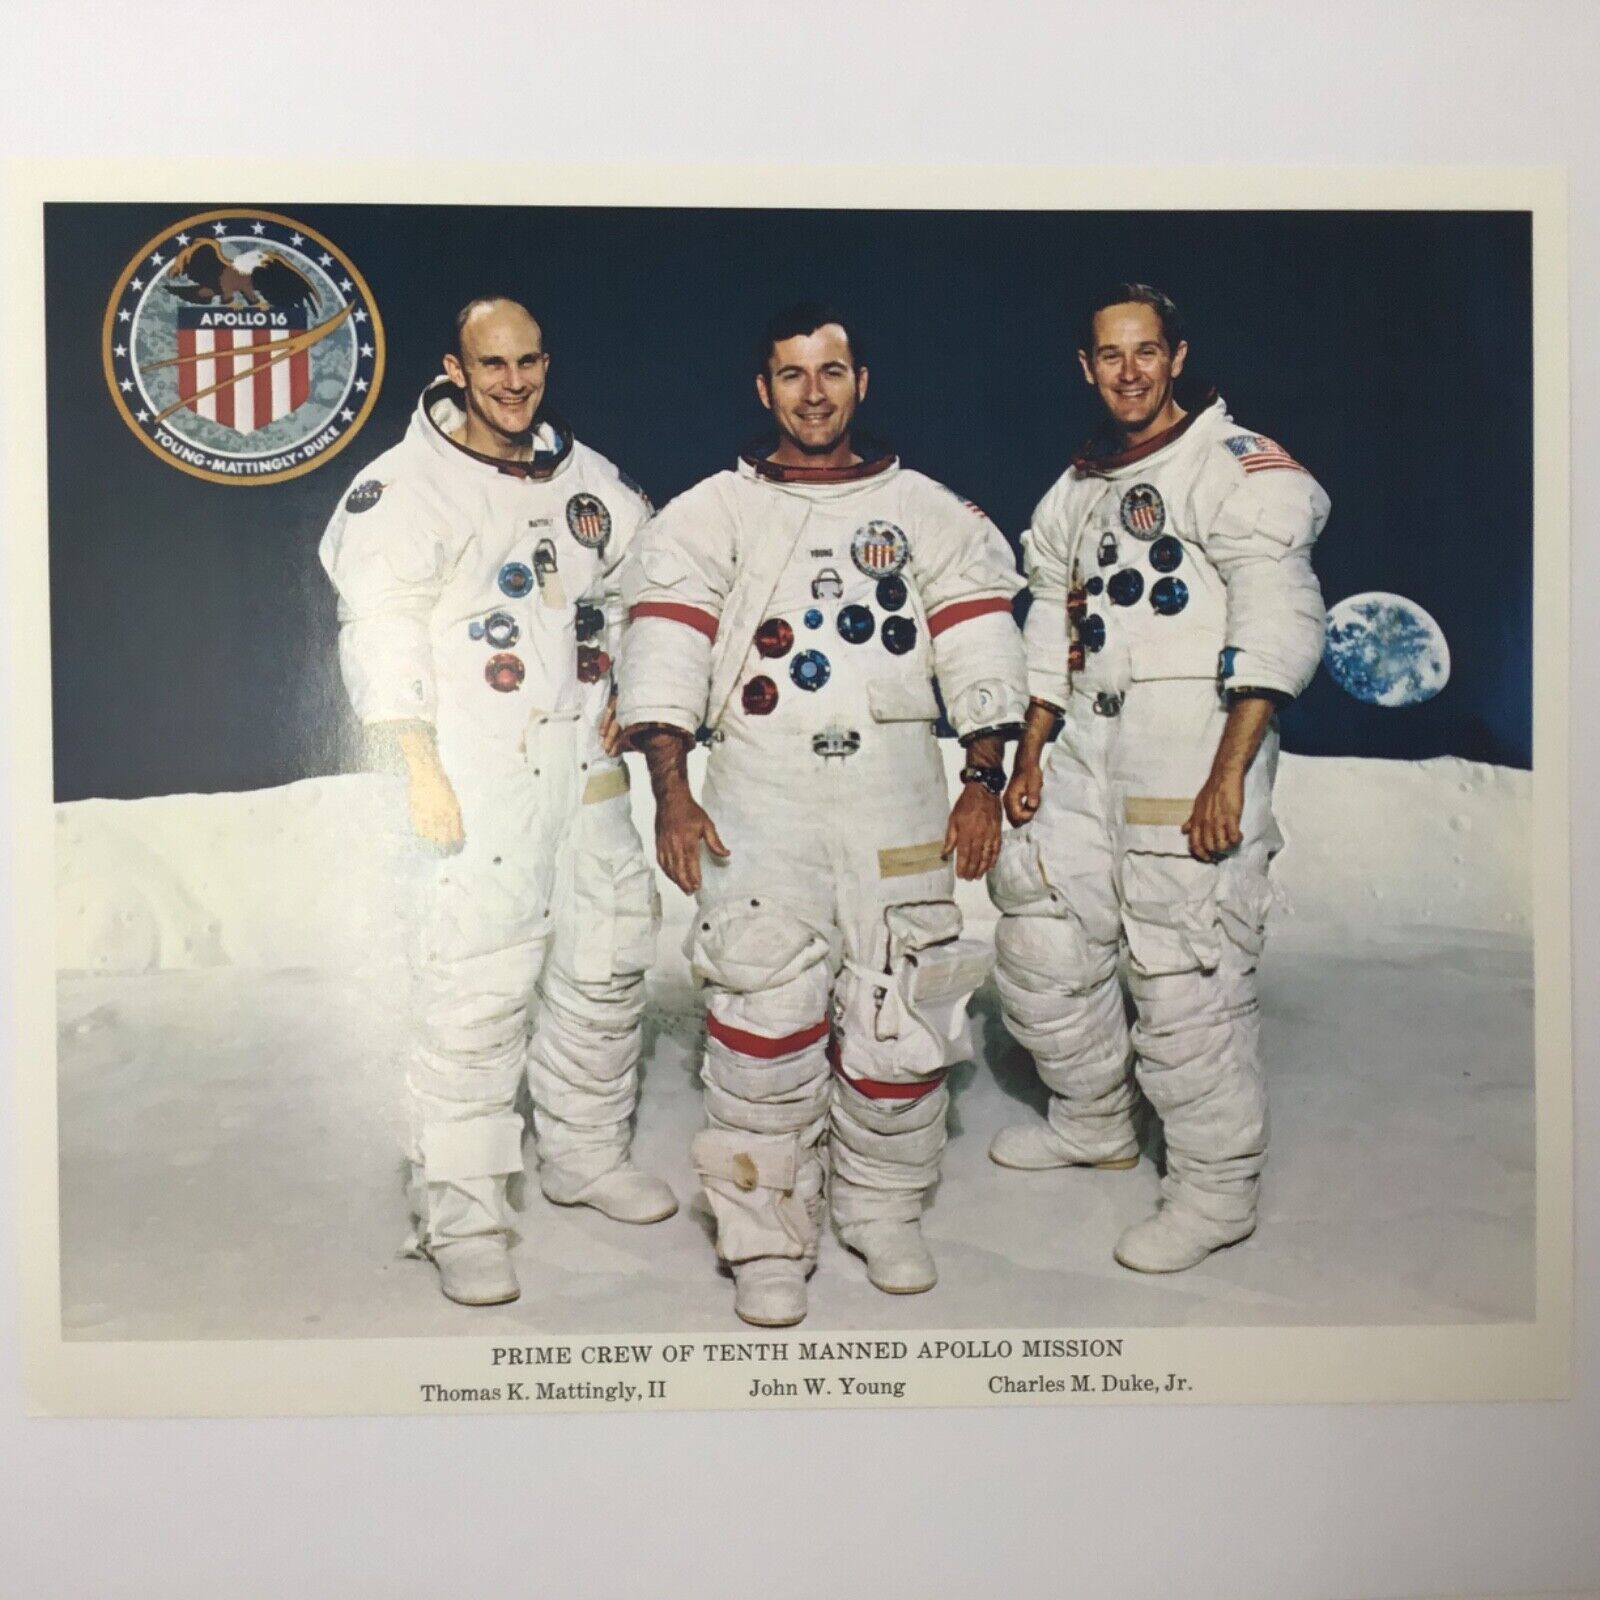 vintage NASA lithography Apollo 16 Prime Crew of 10th Manned mission 1972